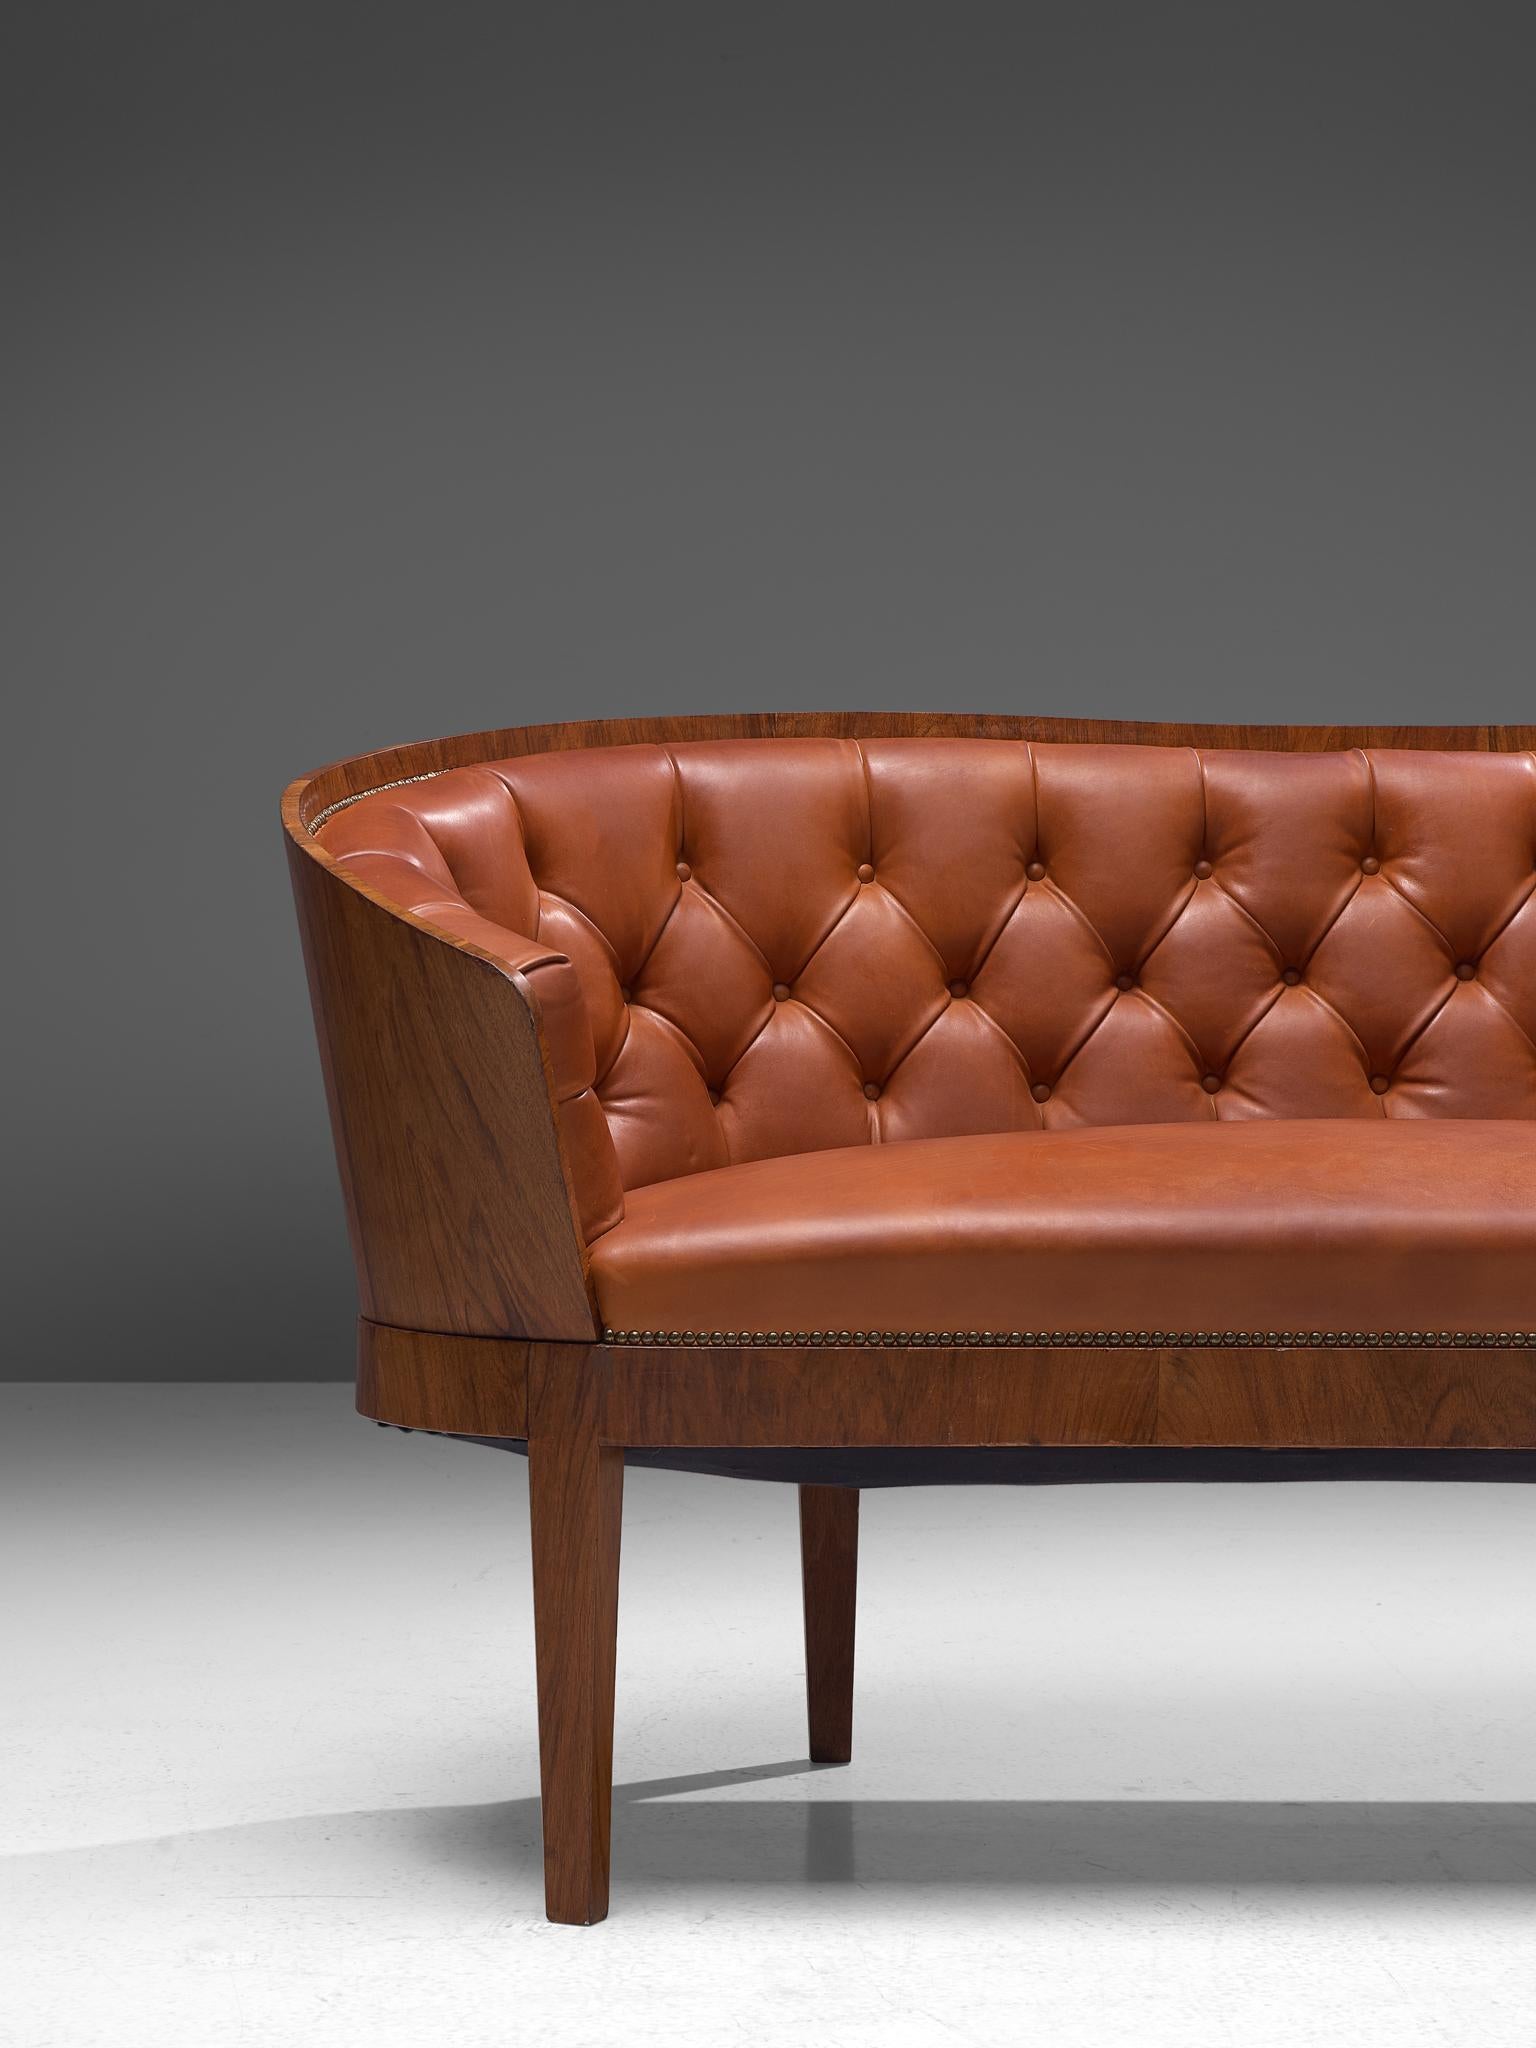 Danish Art Deco Sofa with Walnut Frame and Tufted Red Leather 3